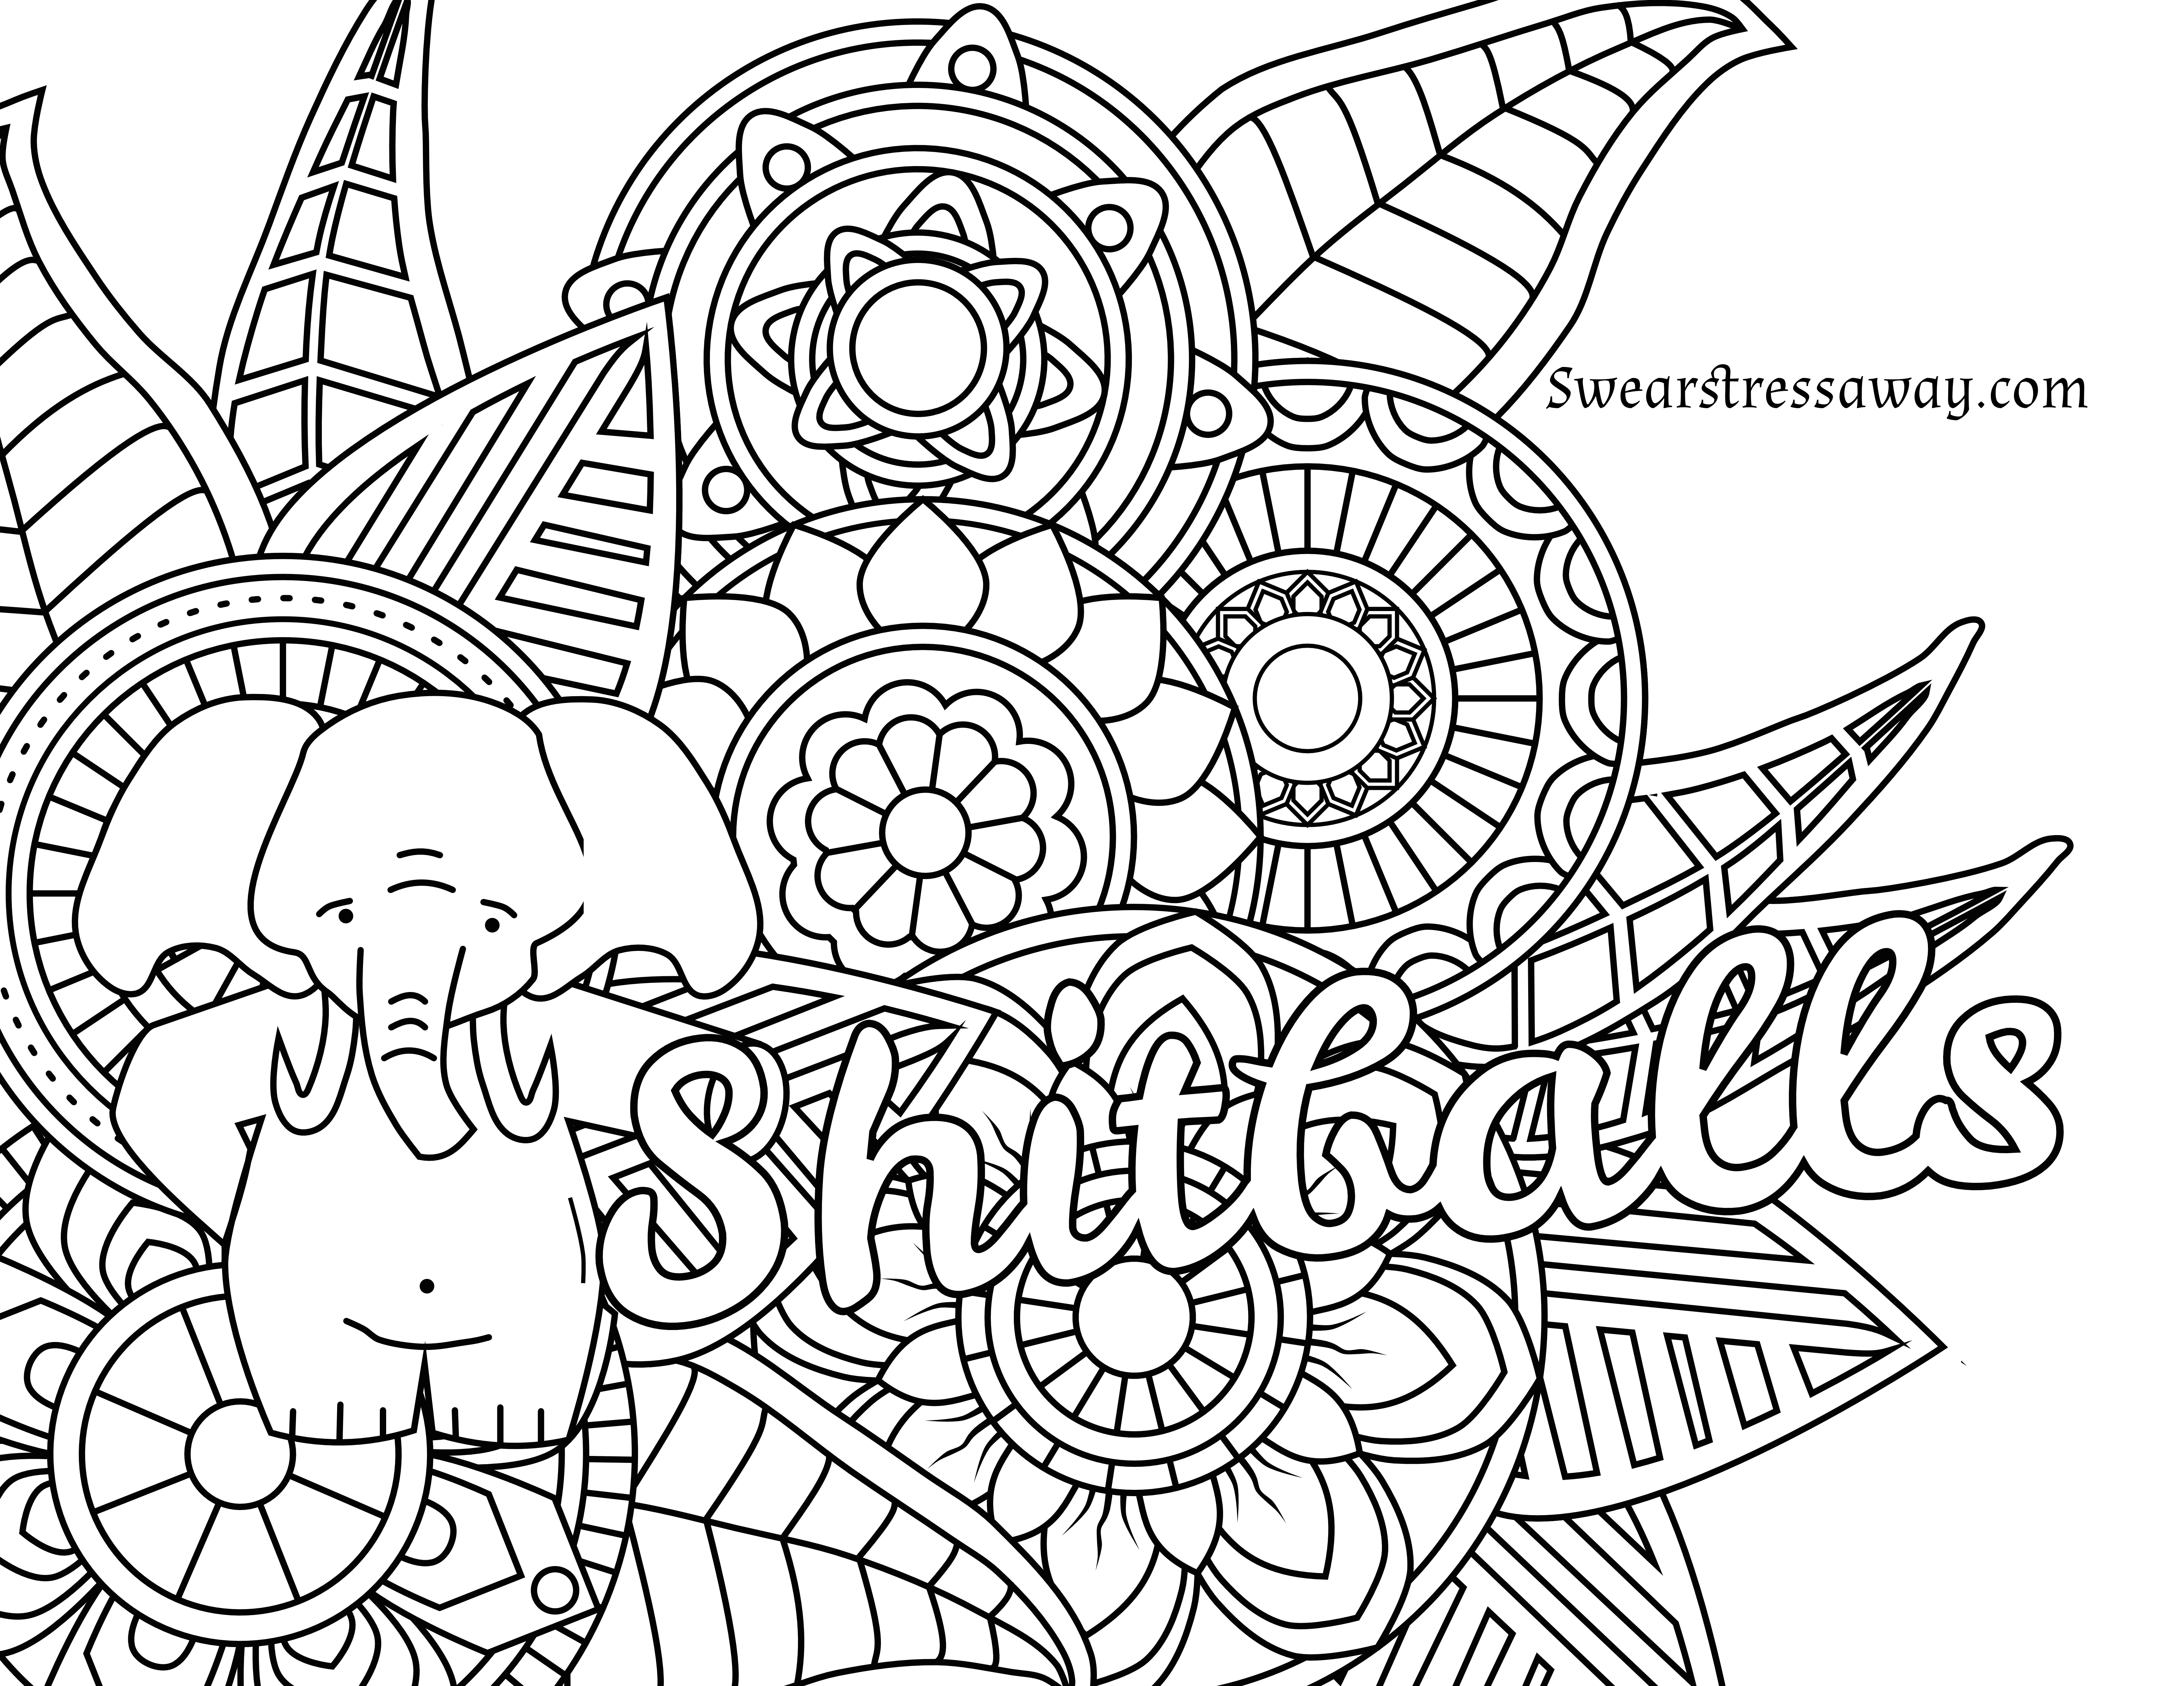 Coloring Ideas : Astonishing Coloring Books For Adults Free - Free Printable Coloring Books For Adults